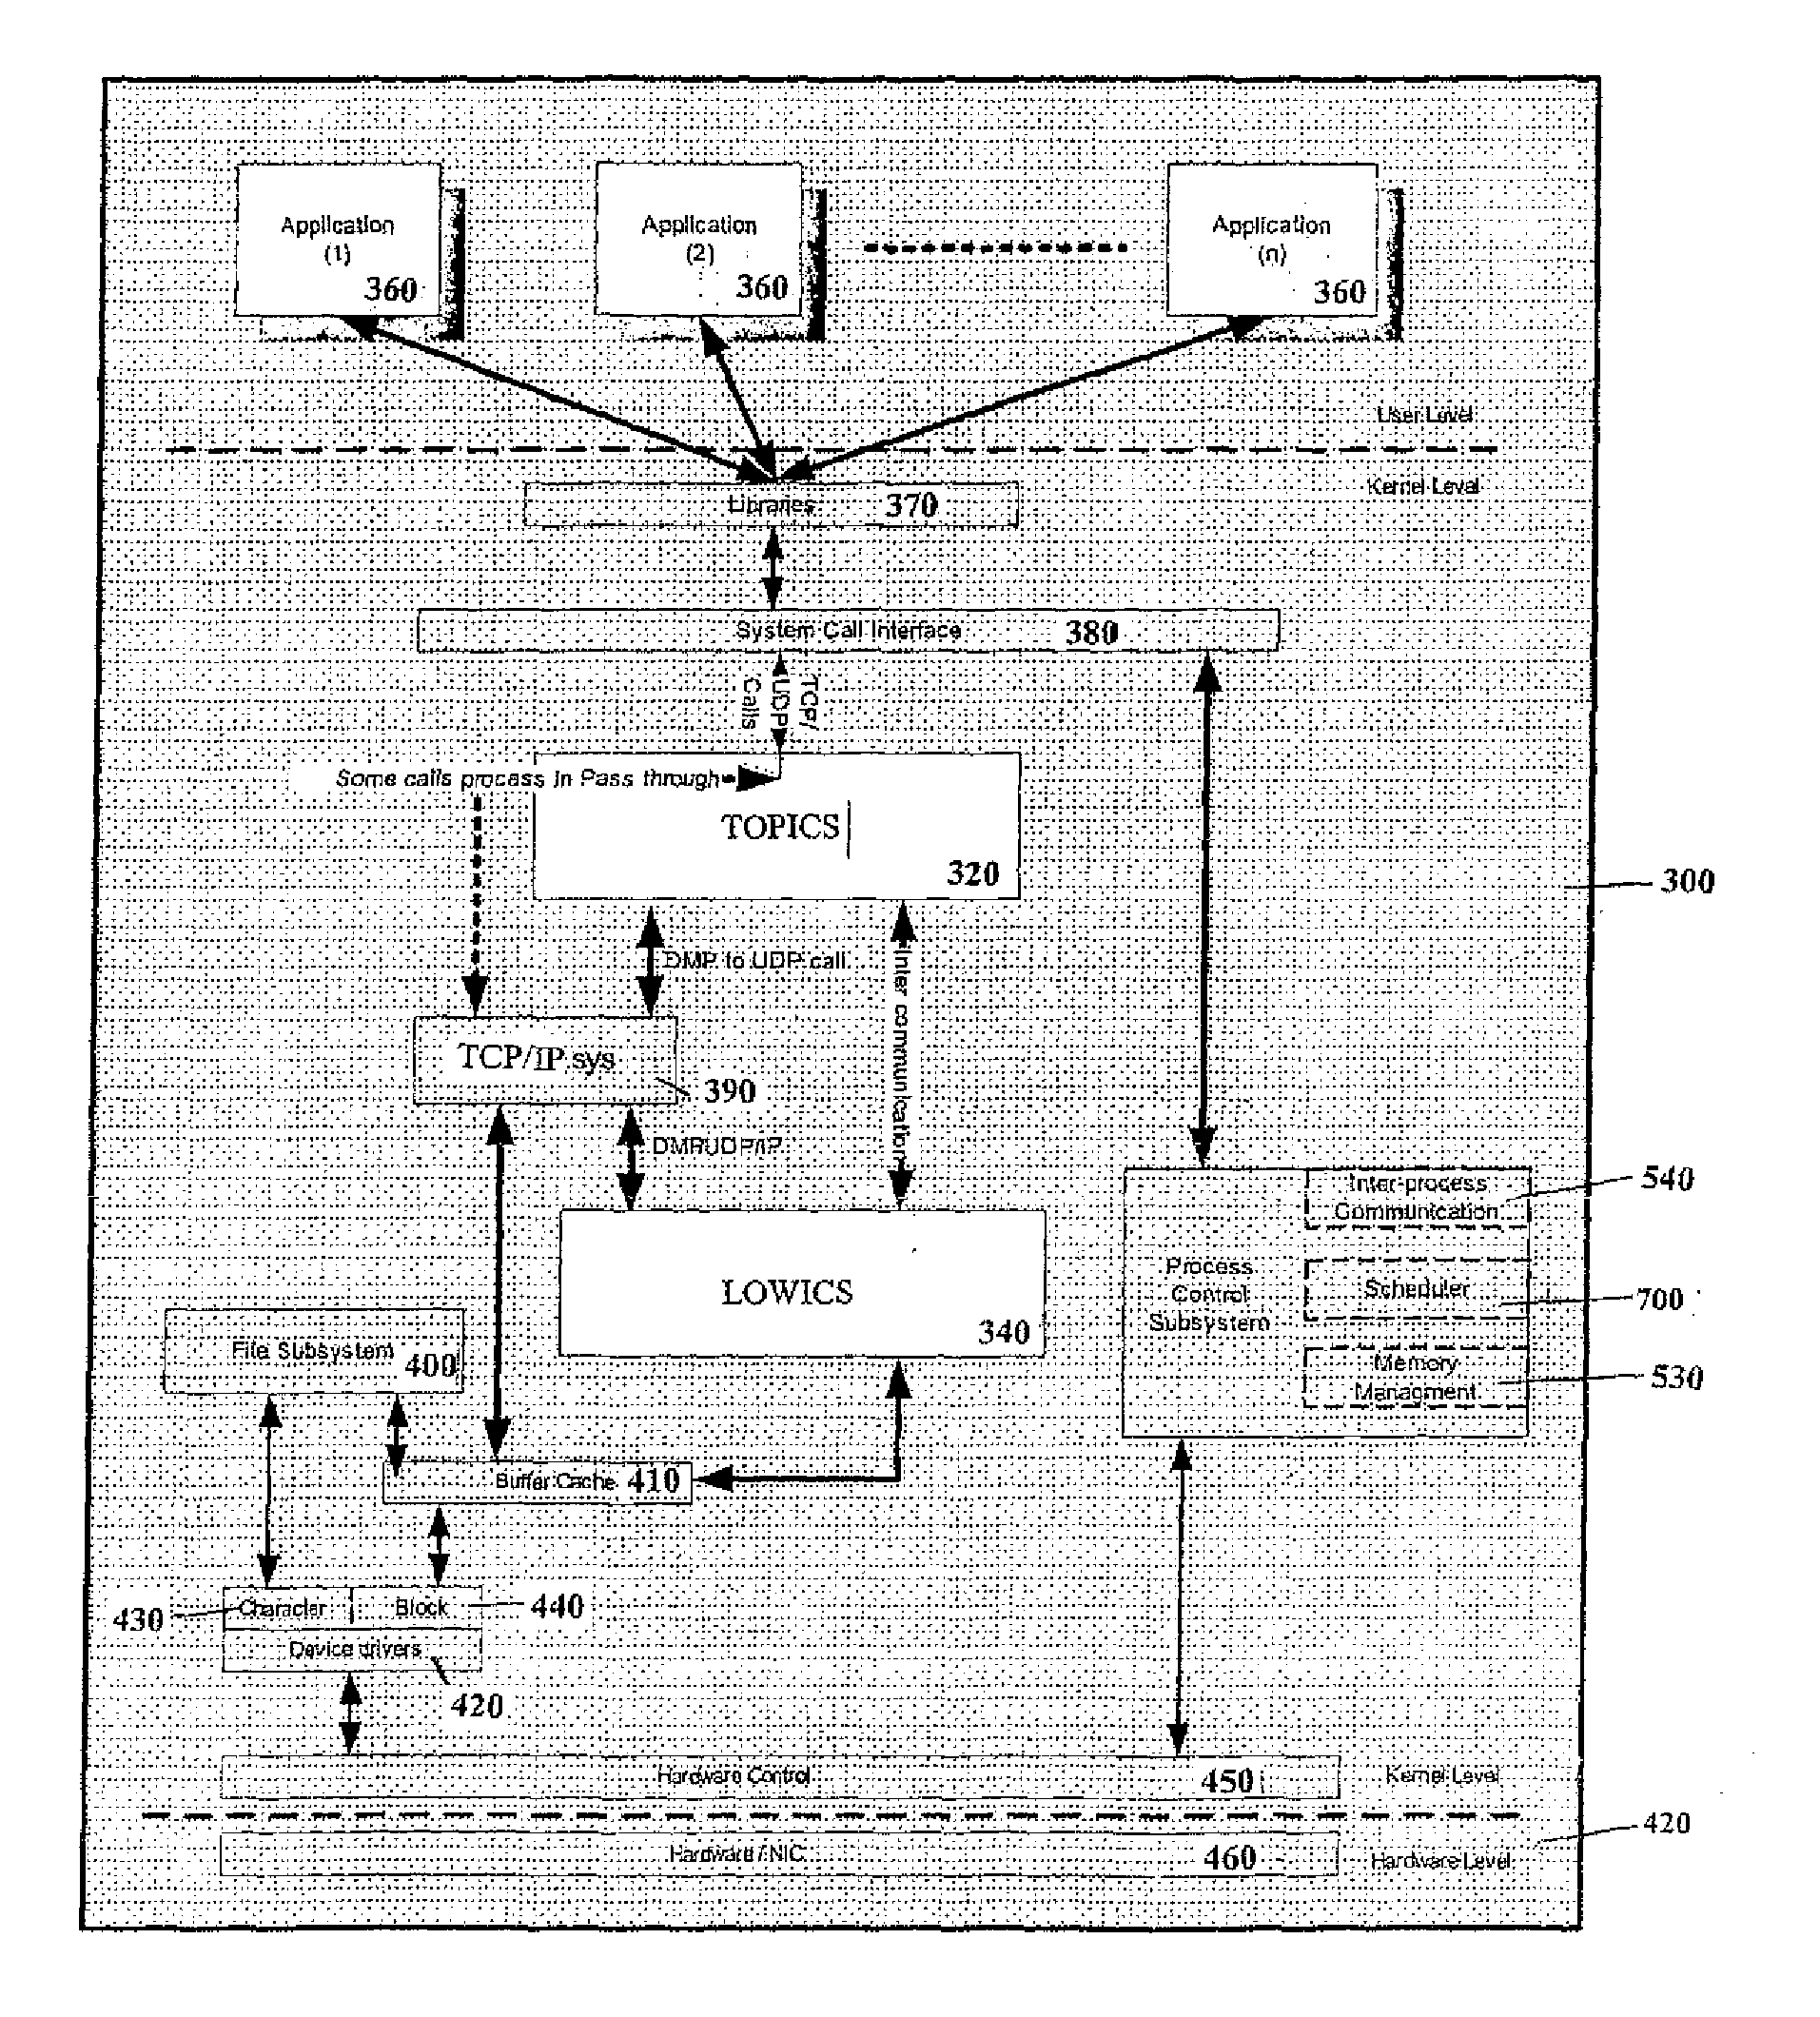 System and Method of Traffic Management Over Mixed Networks